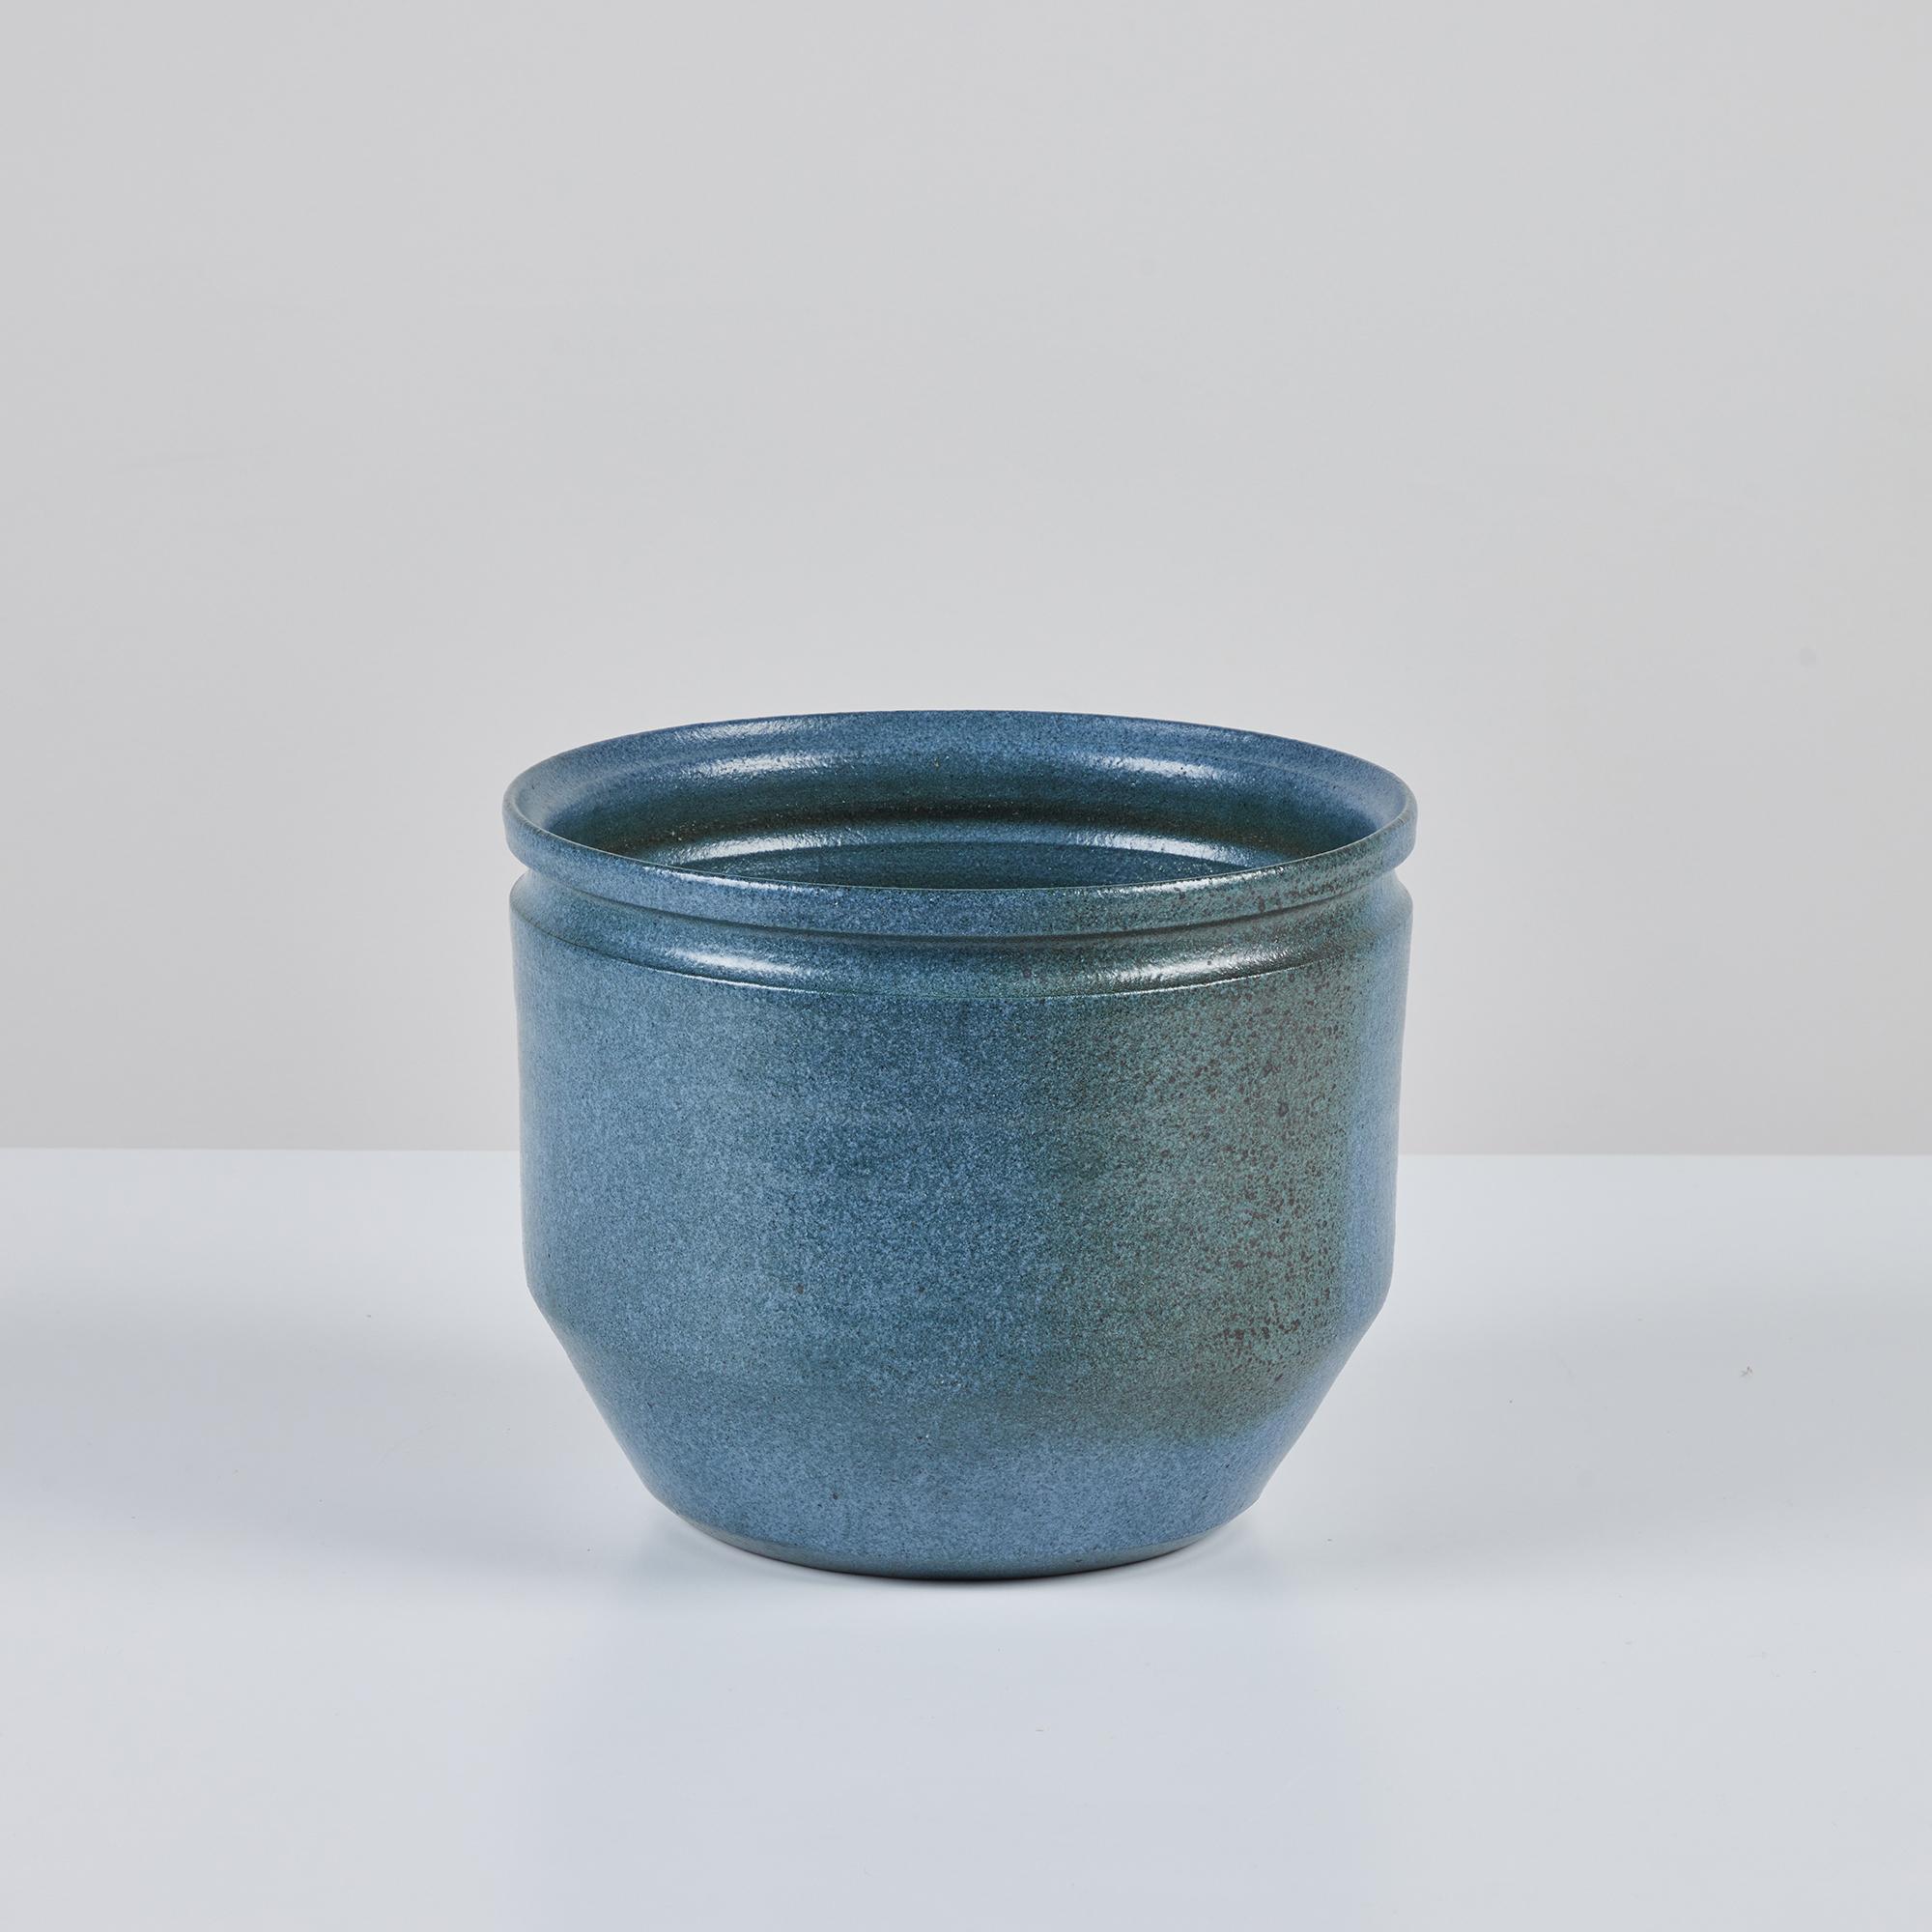 Ceramic bowl planter from David Cressey and Robert Maxwell for Earthgender, c.1970s, USA. The table top sized planter has a blue speckle glazed interior and exterior with slightly bowed sides and a flattened lip. 

Dimensions
10.5